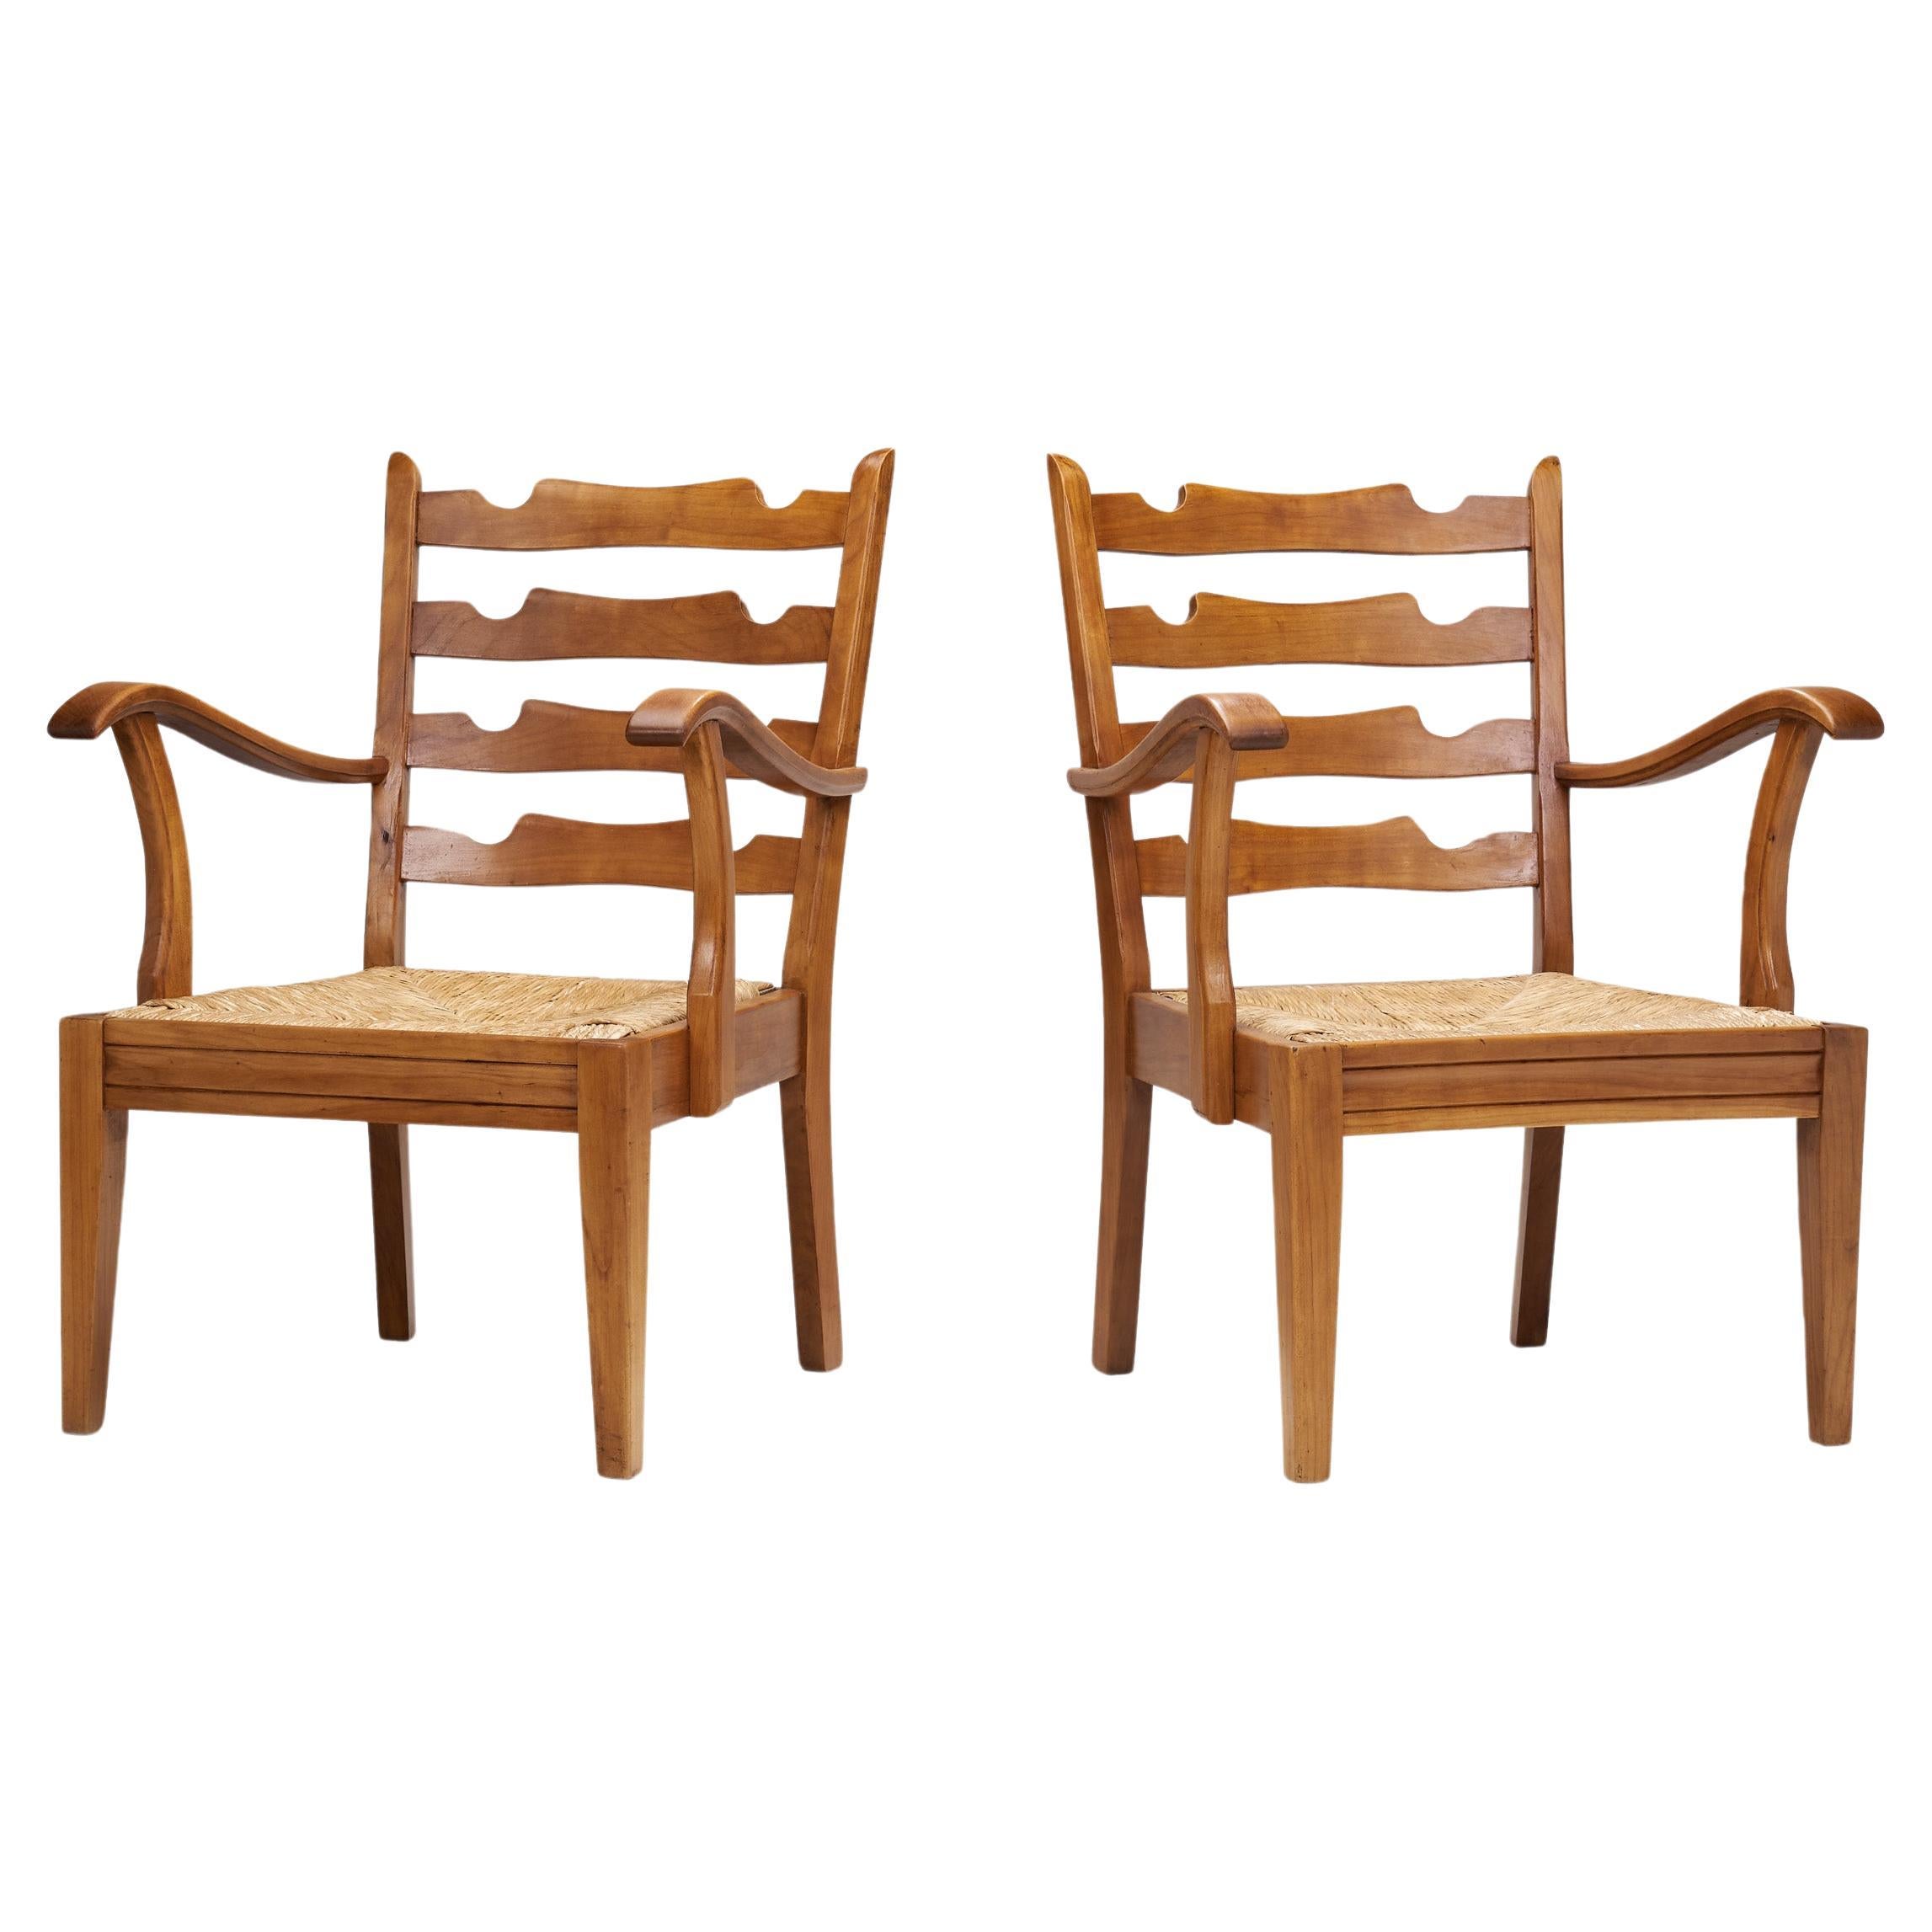 French Cherry Wood Chairs with Seats of Woven Papercord, France 1950s